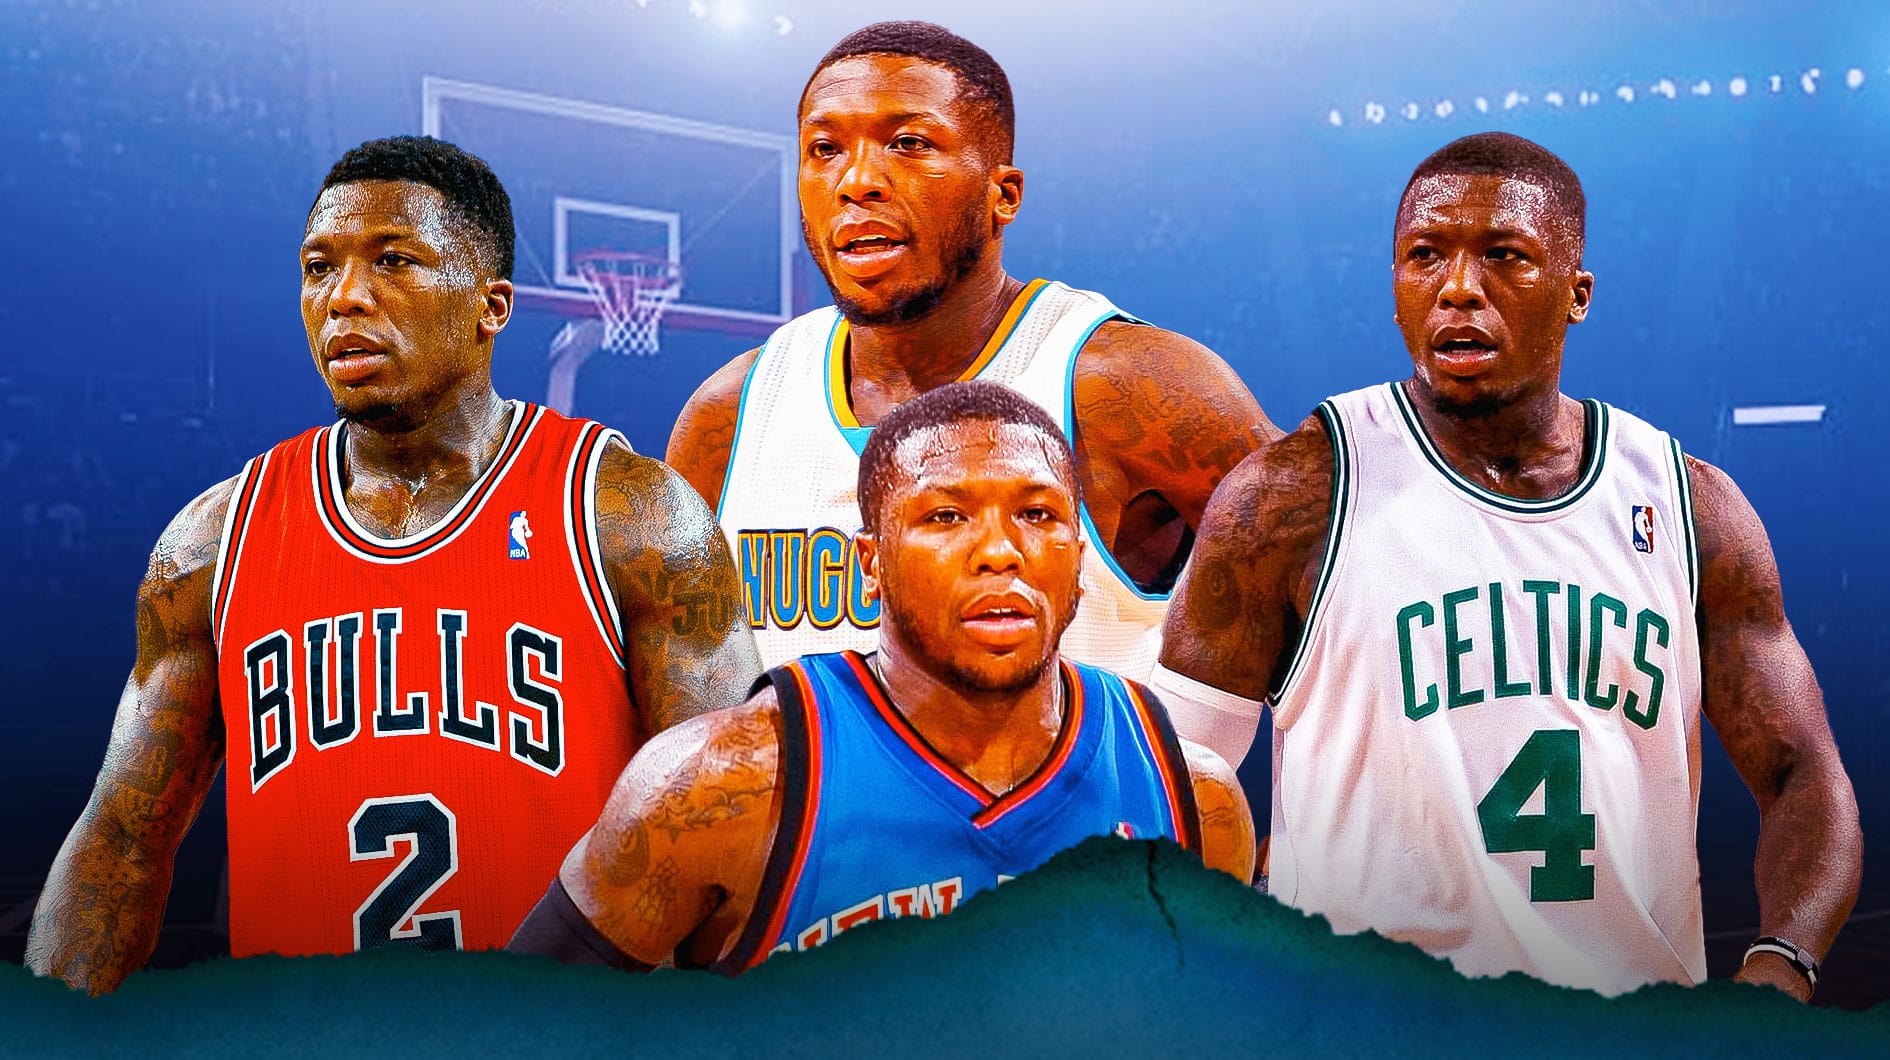 Nate Robinson playing for the Bulls, Knicks, Nuggets and Celtics.